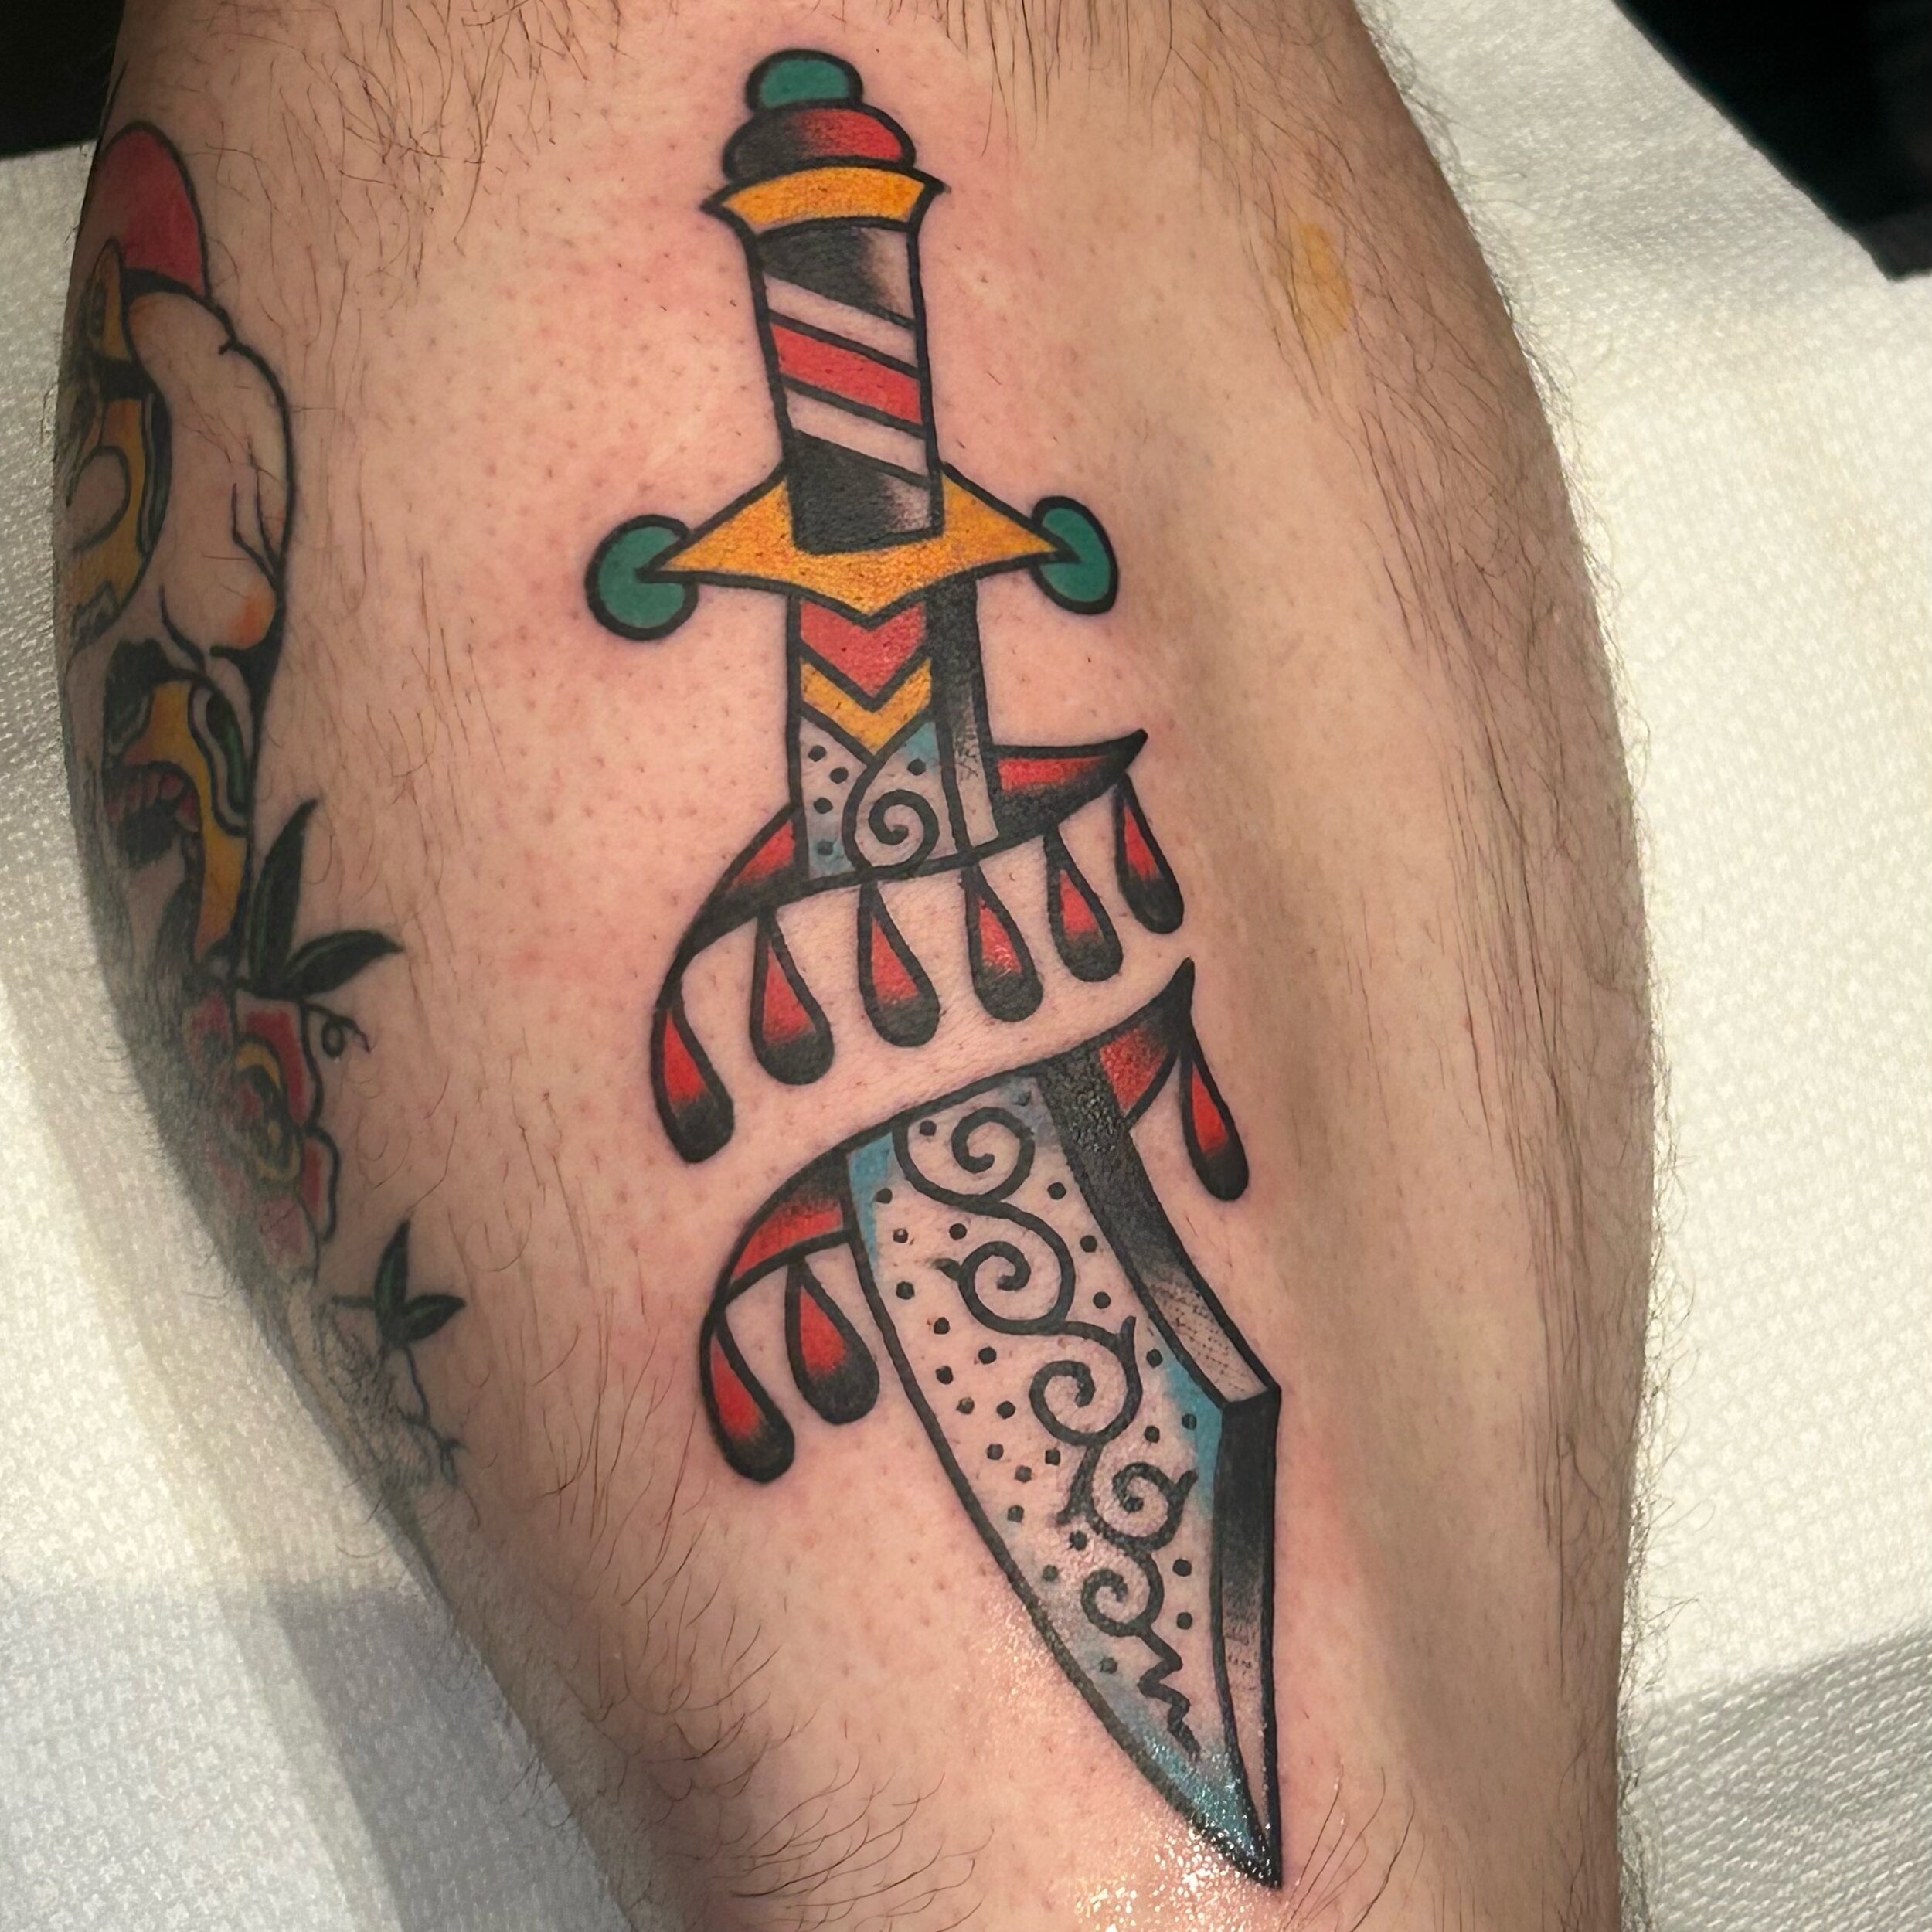 Always down to put a blade on ya, made at Tattoos &amp; Blues a few weeks back.